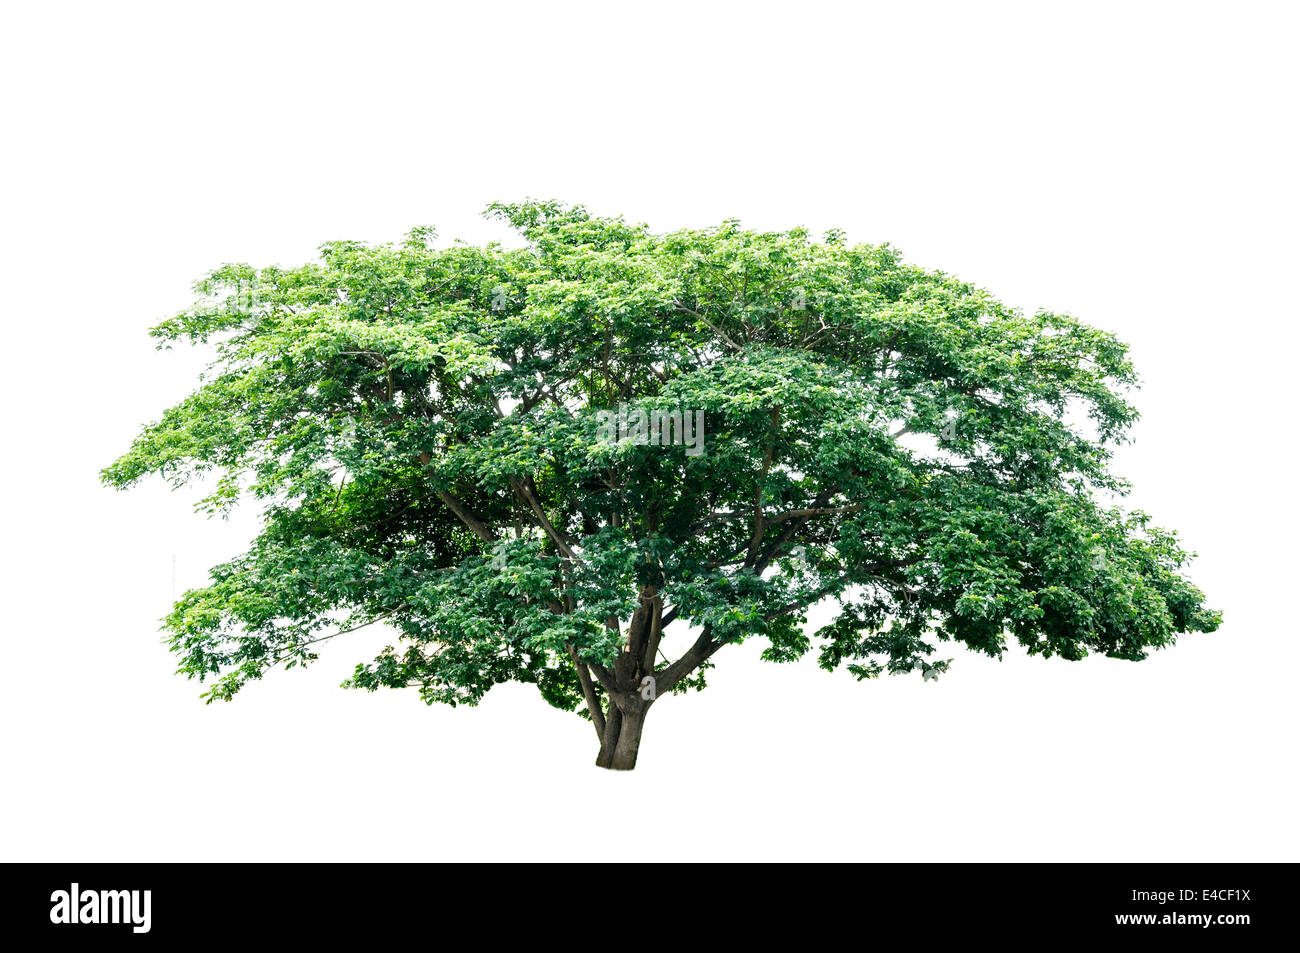 Green tree isolated on white background Stock Photo